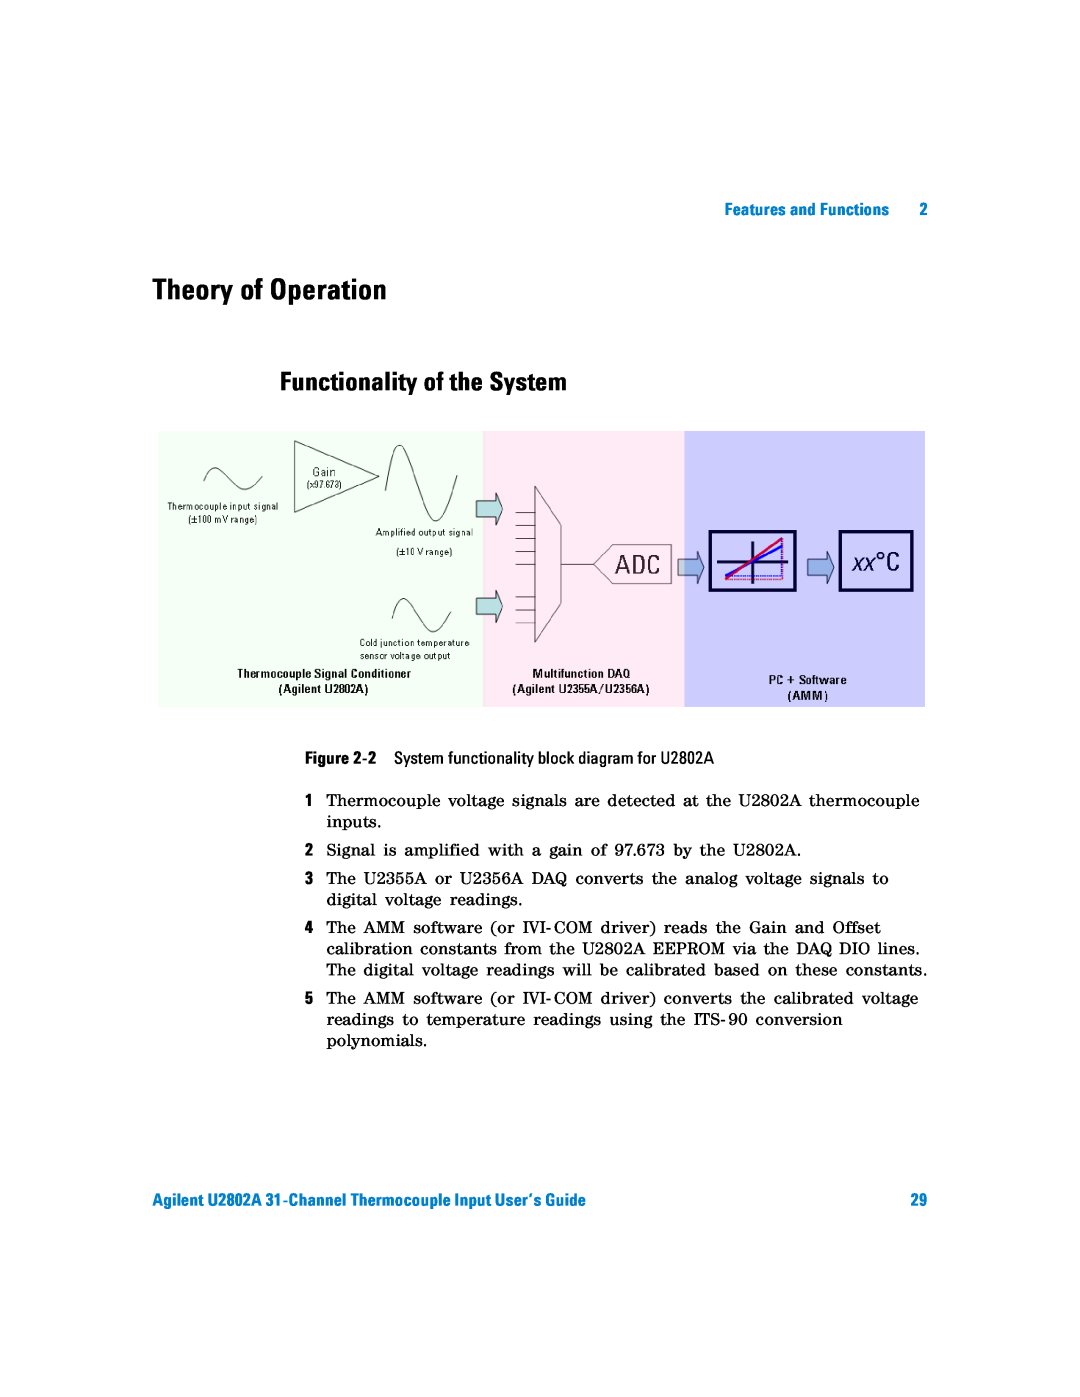 Agilent Technologies U2802A manual Theory of Operation, Functionality of the System 